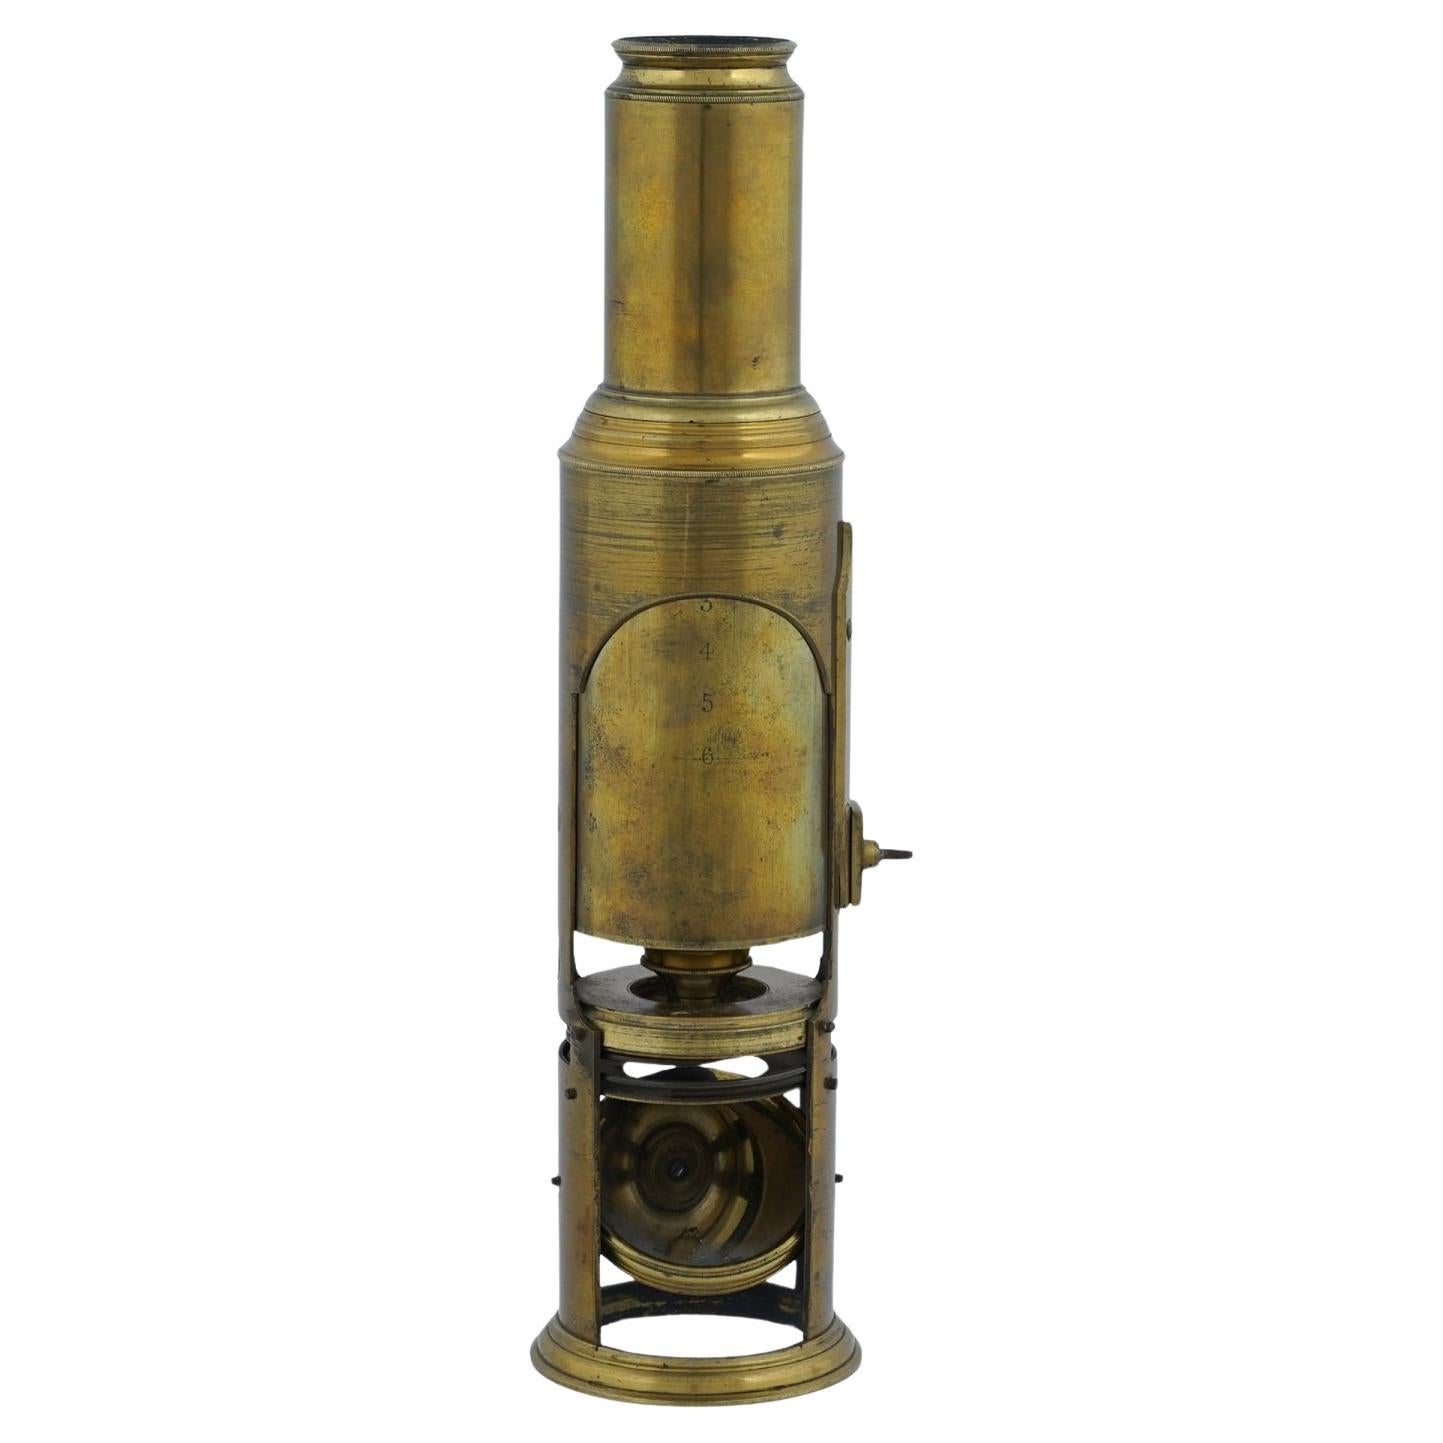 A Victorian Brass Microscope By J.P. Cutts & Sons